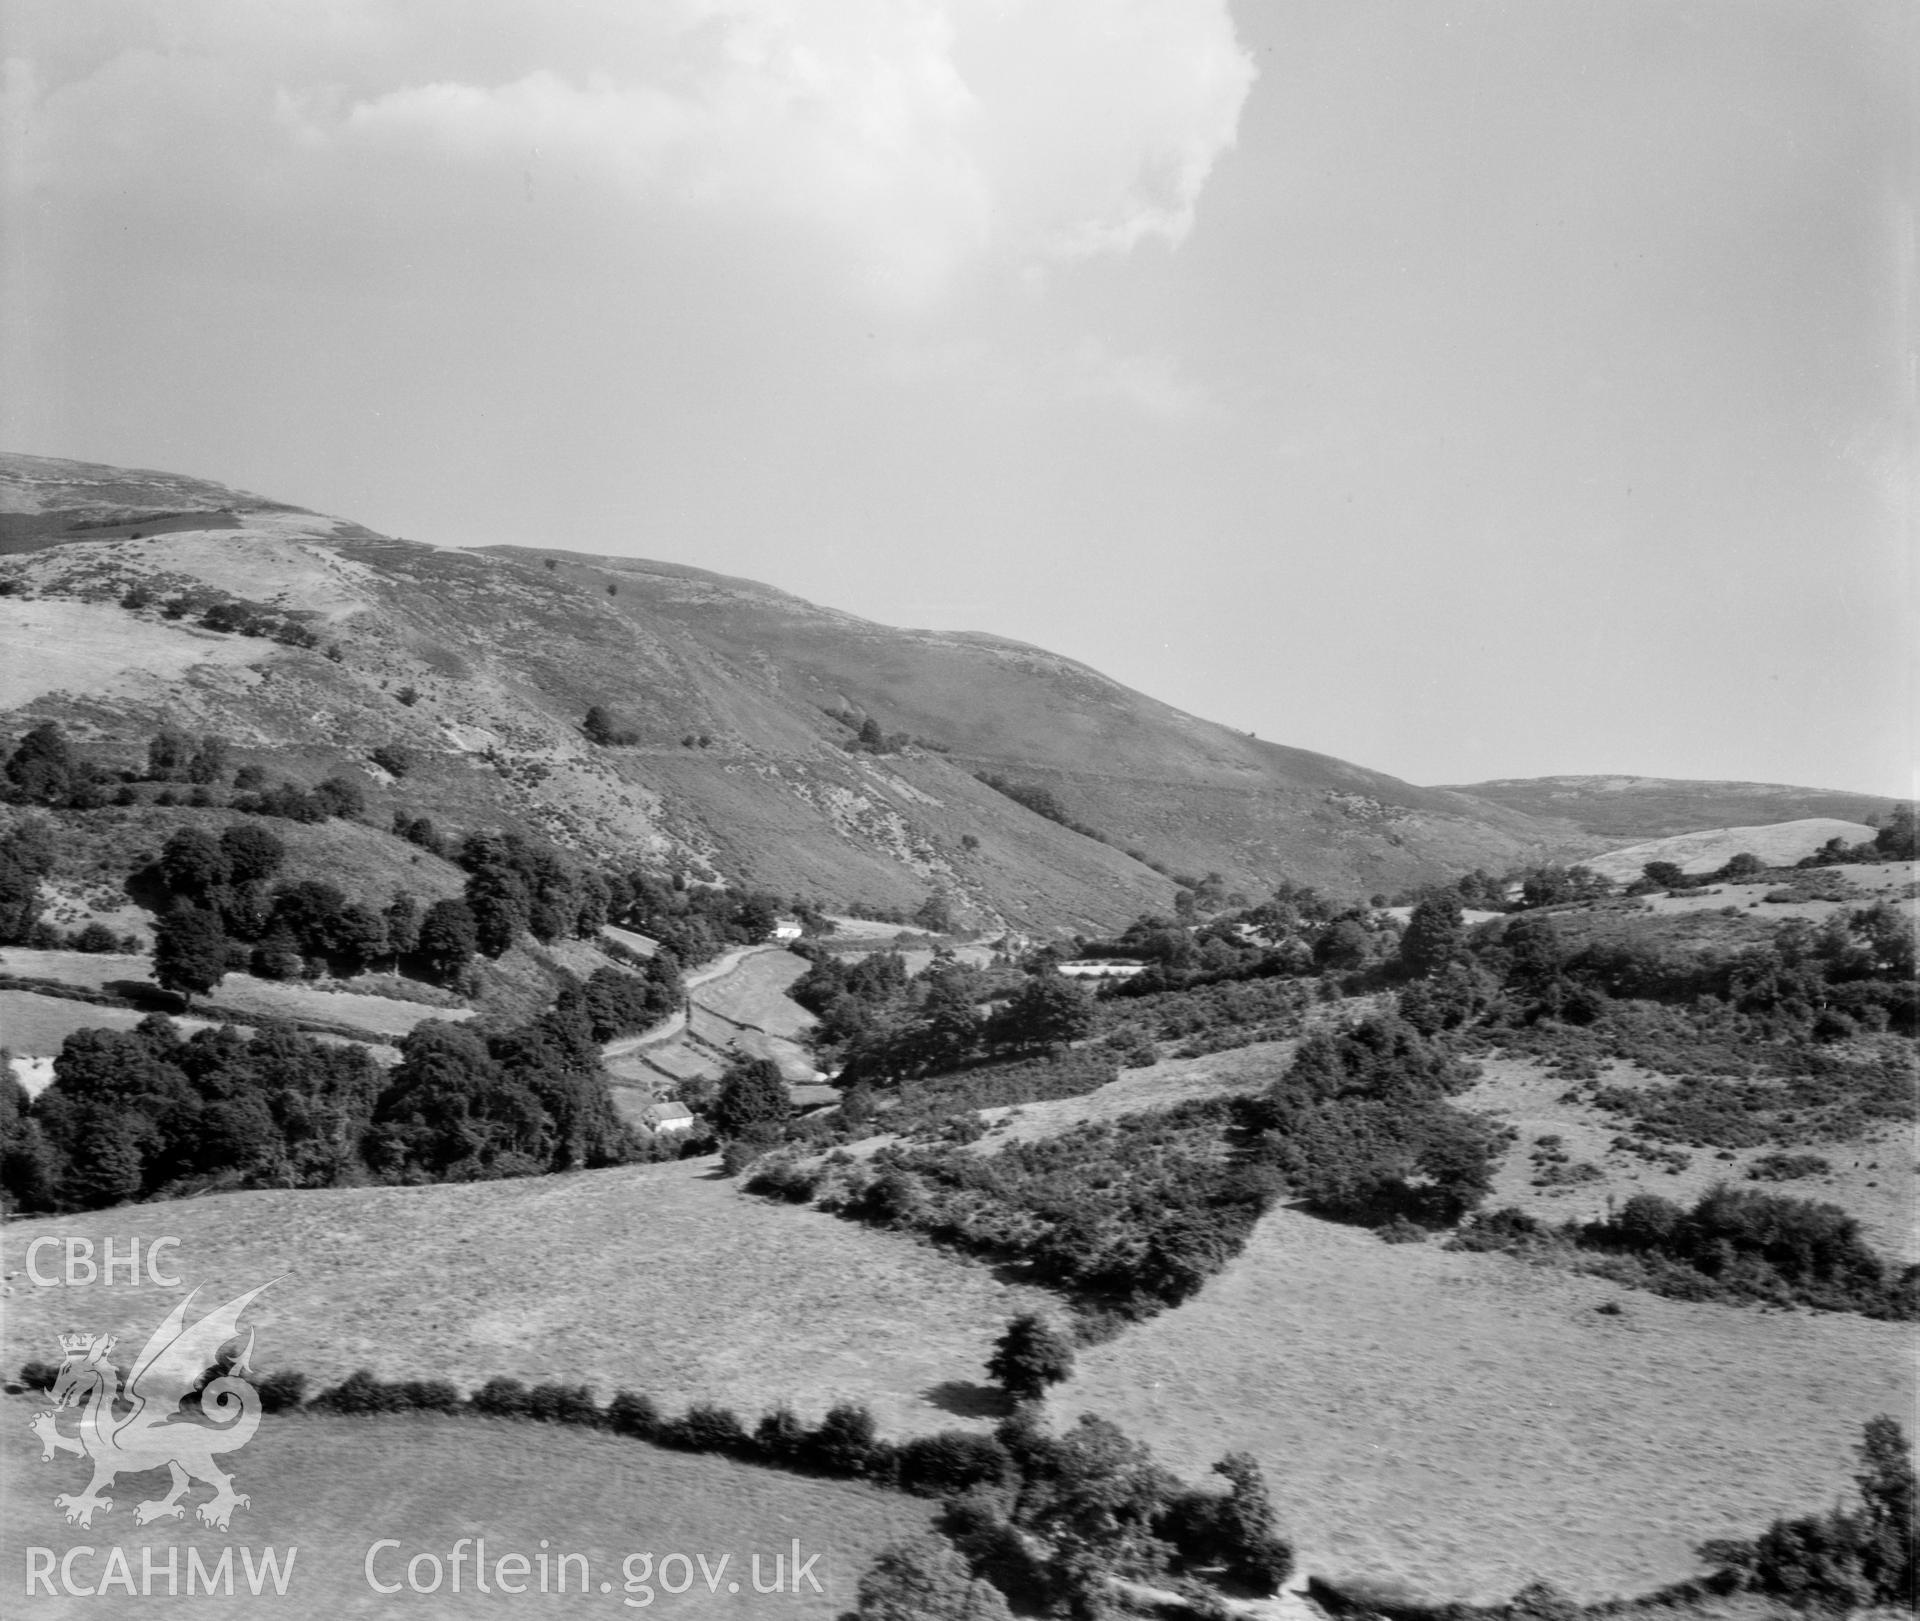 Landscape view of Clwydian Hills